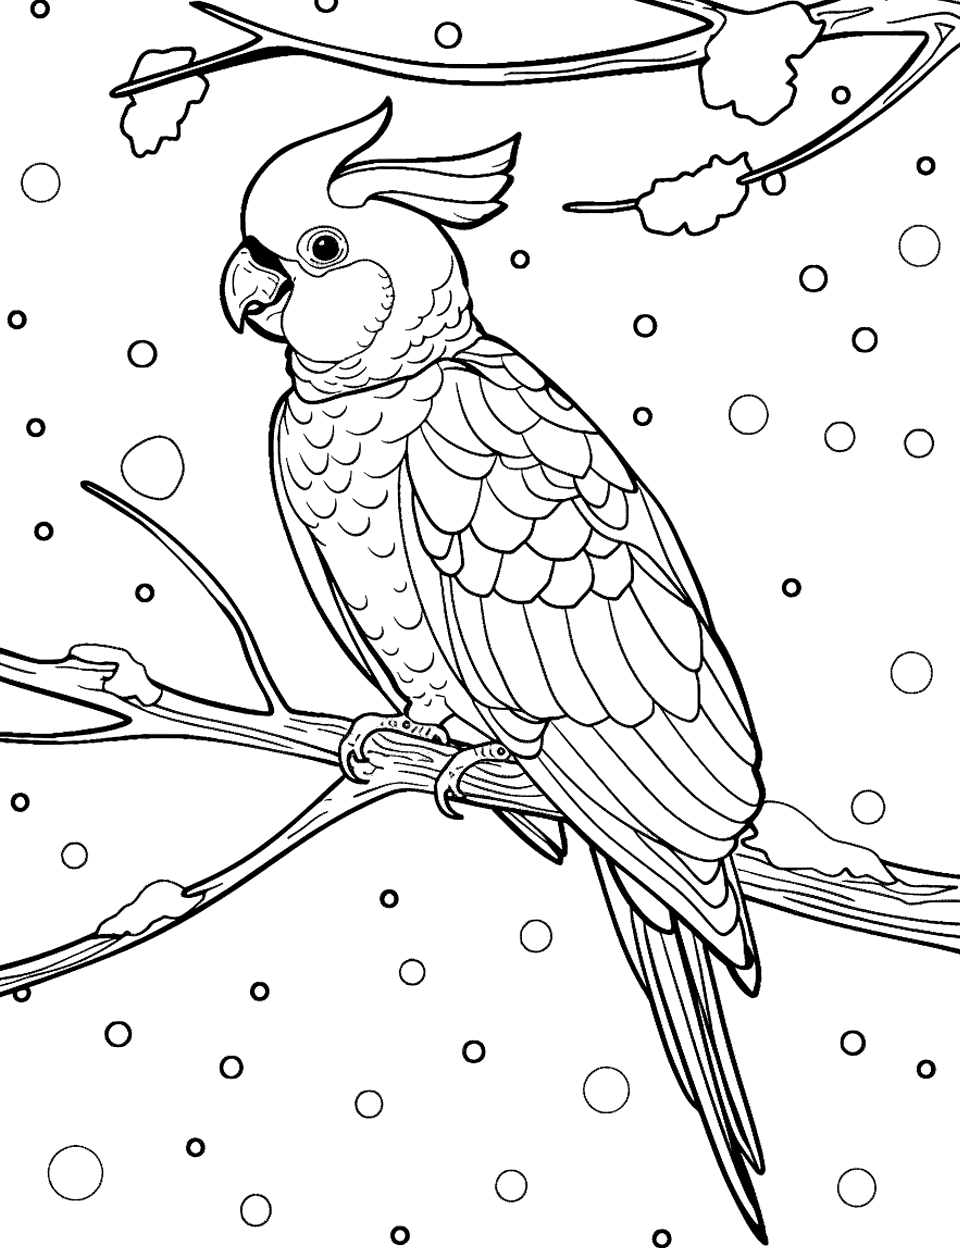 Cockatoo in the Snow Parrot Coloring Page - A cockatoo observing its surroundings, with gentle snow falling around it.